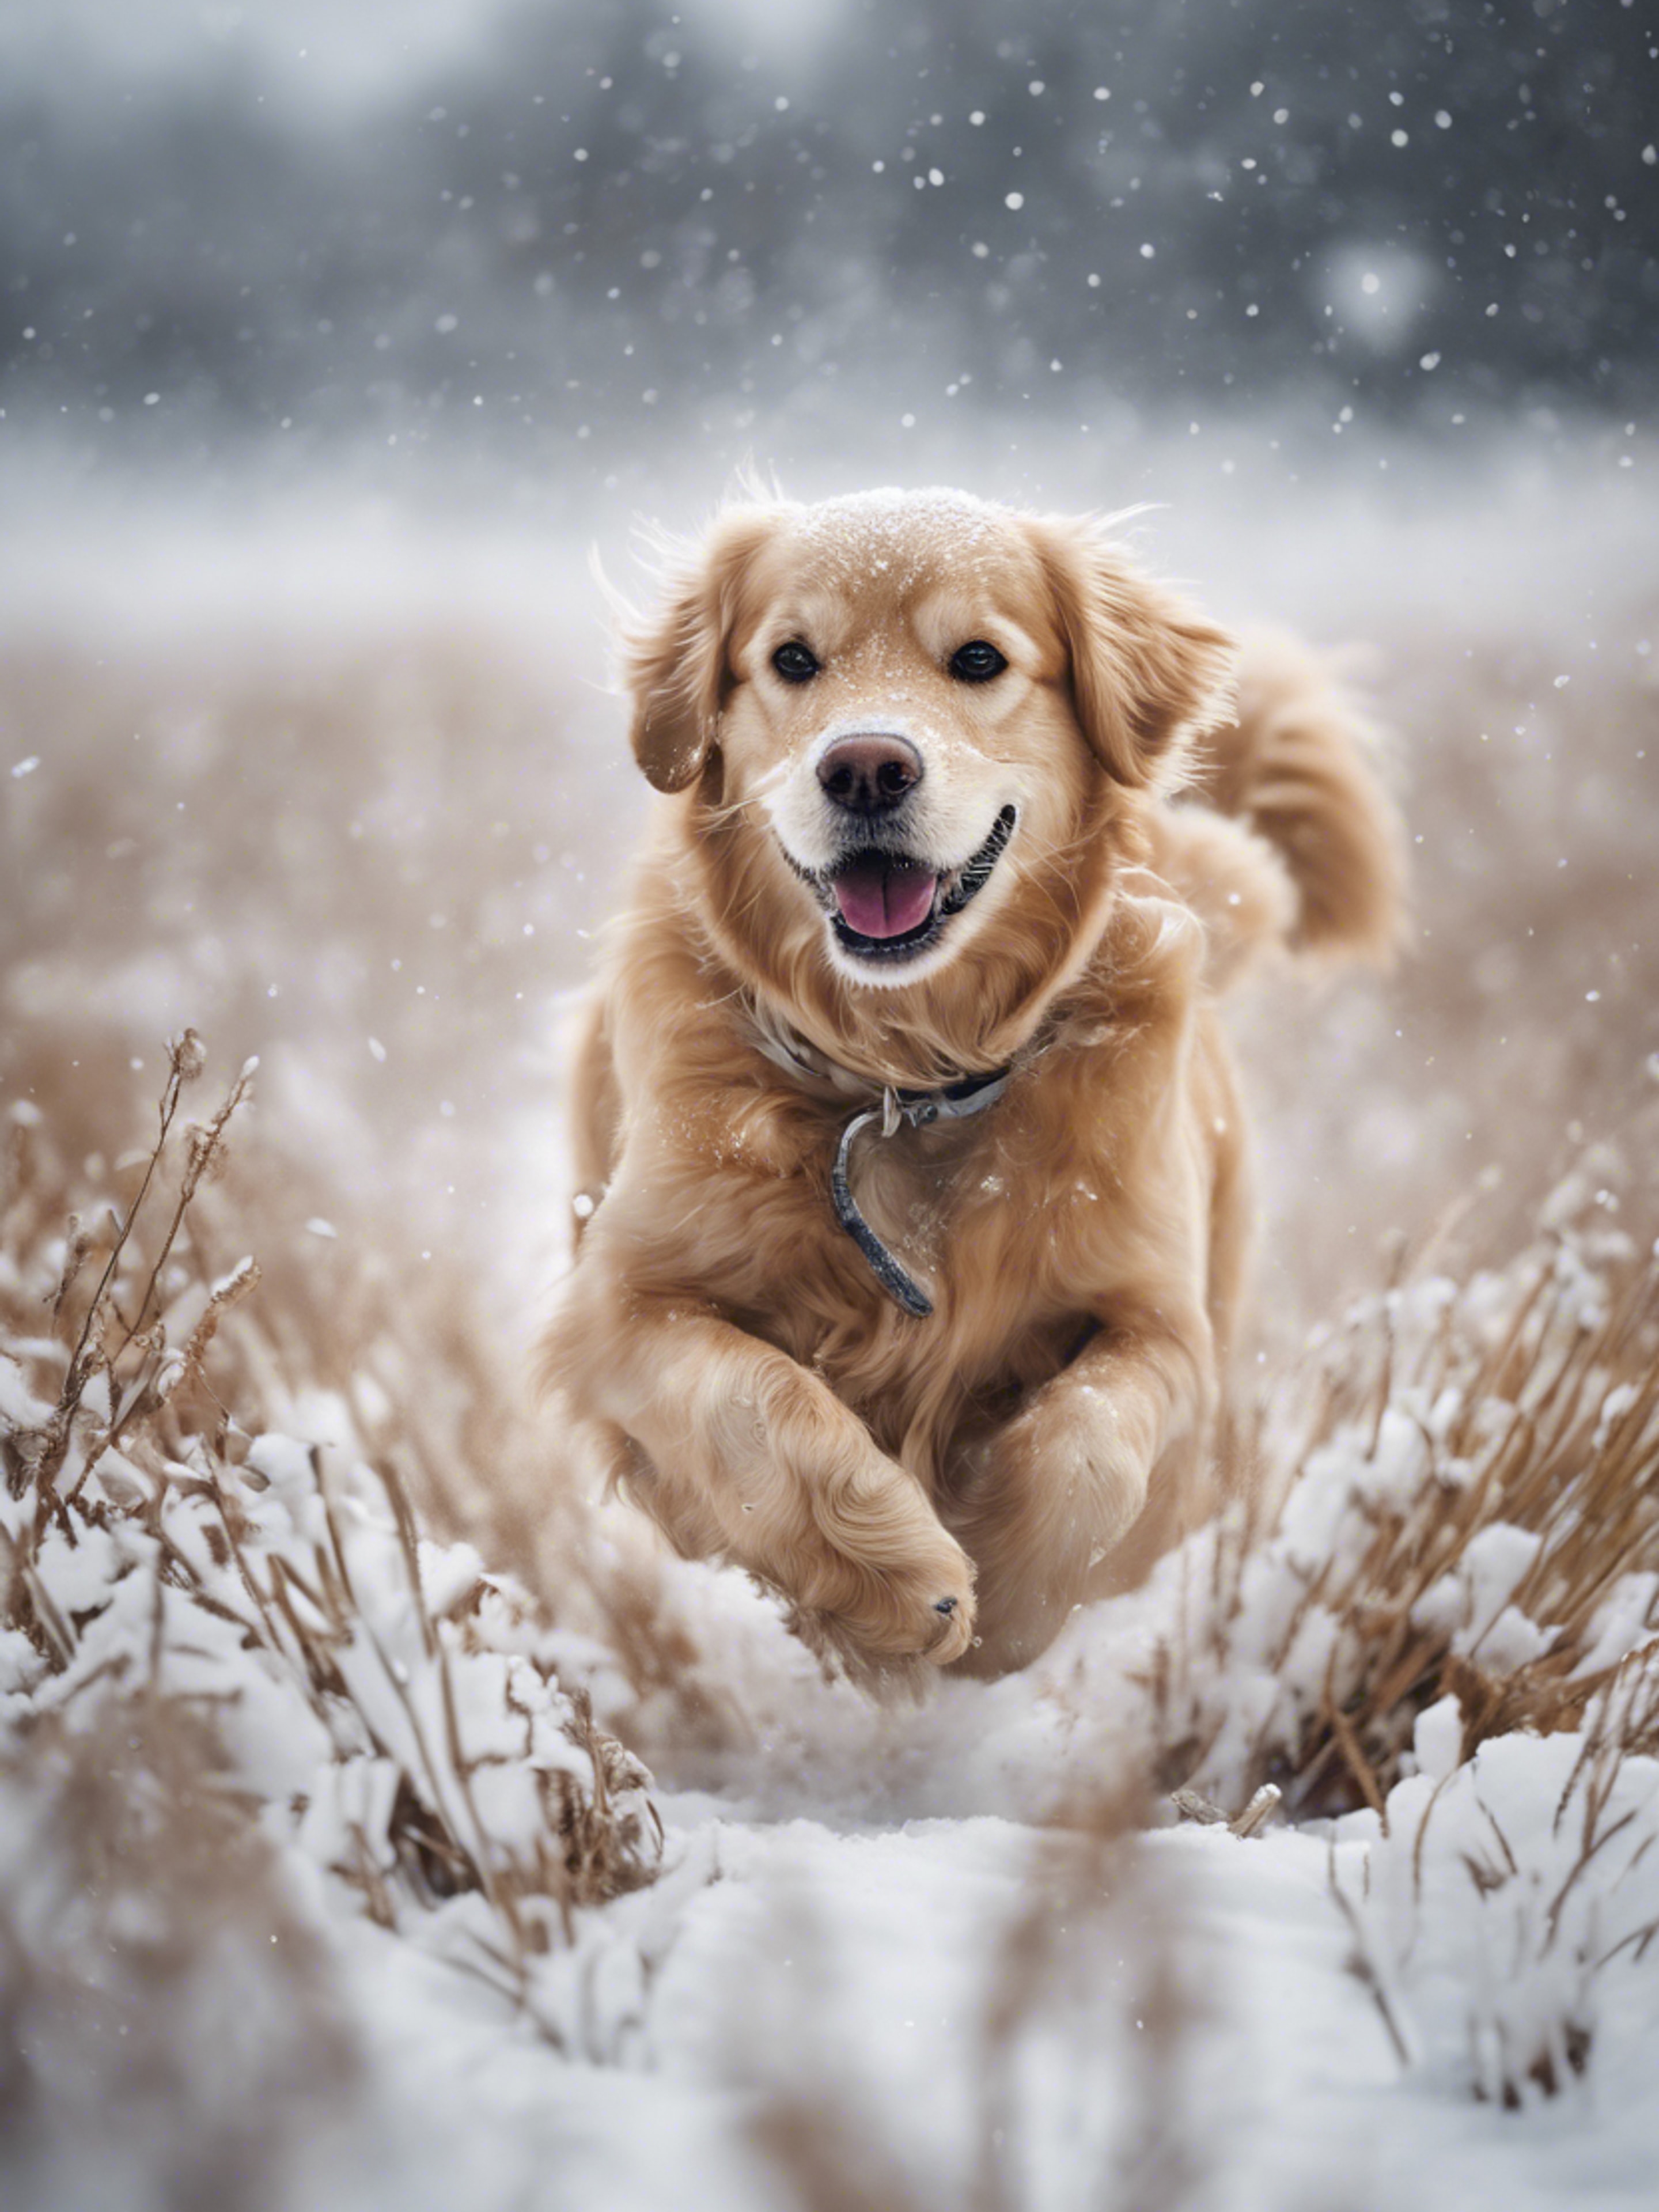 A golden retriever joyously bounding through a snow-covered field, its fur dusted with white. Wallpaper[f6017614d53444c2949b]